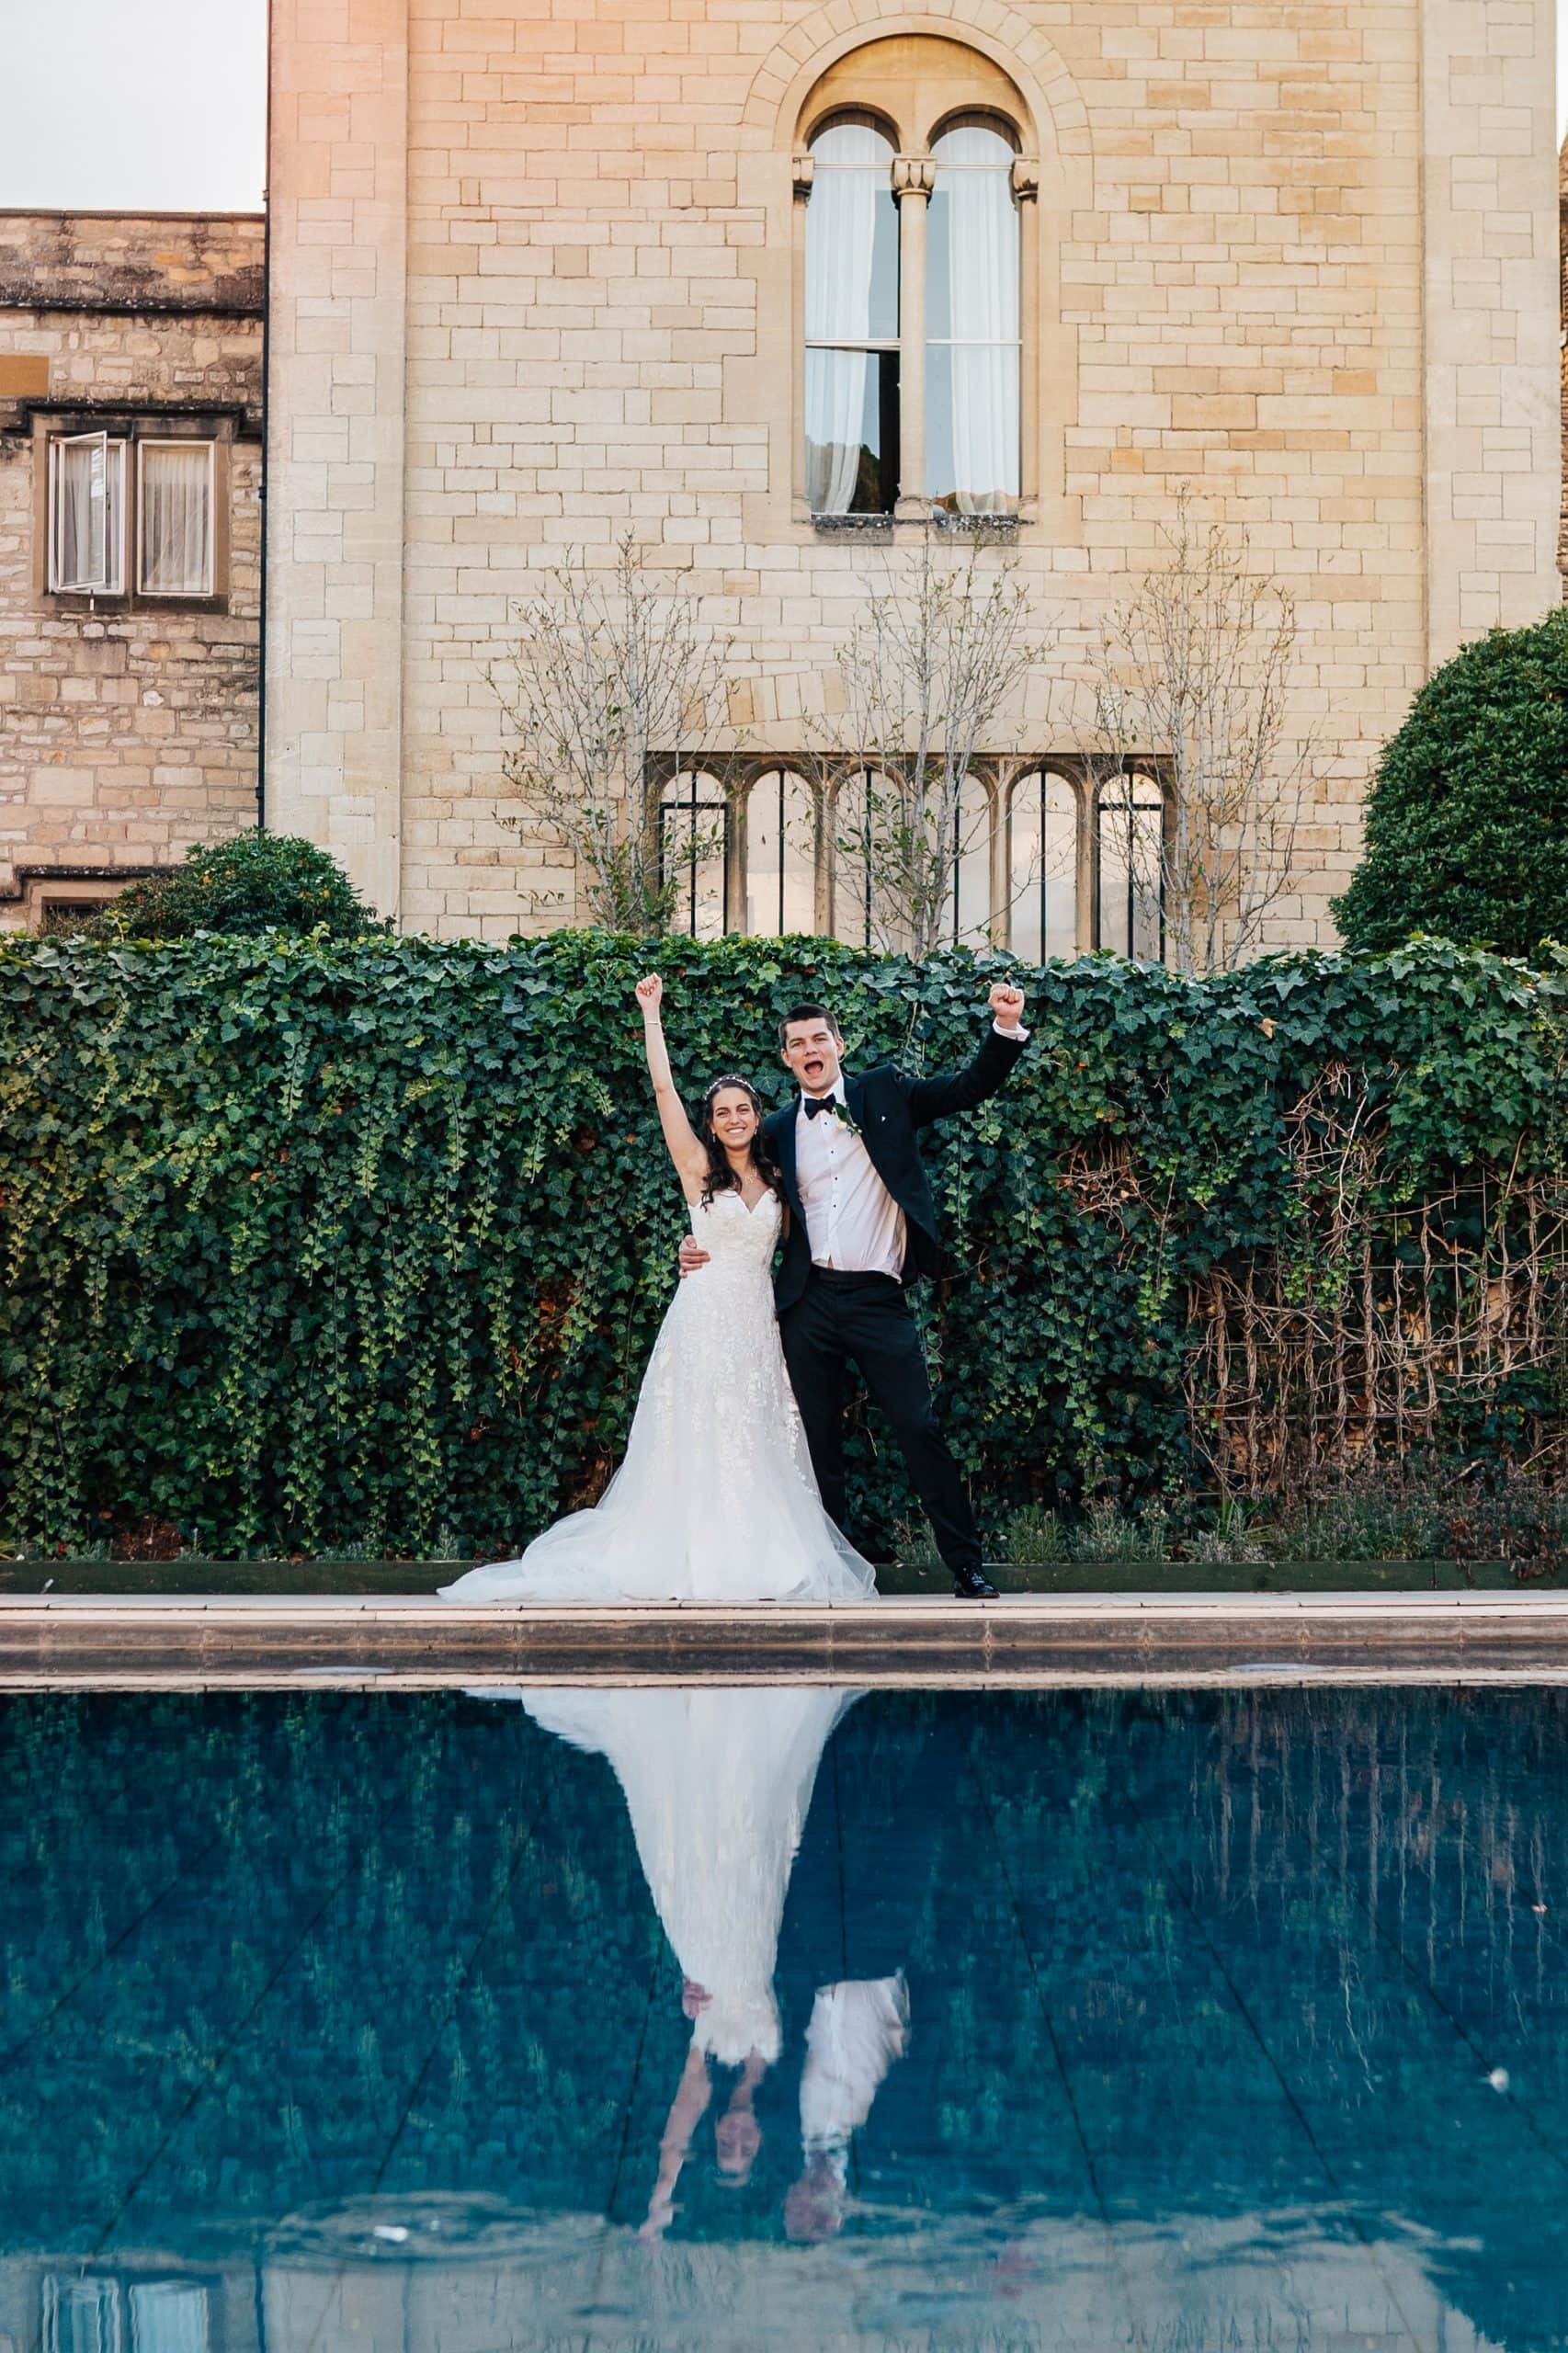 Wedding celebrations for this newlywed couple at Ellenborough Park Hotel swimming pool